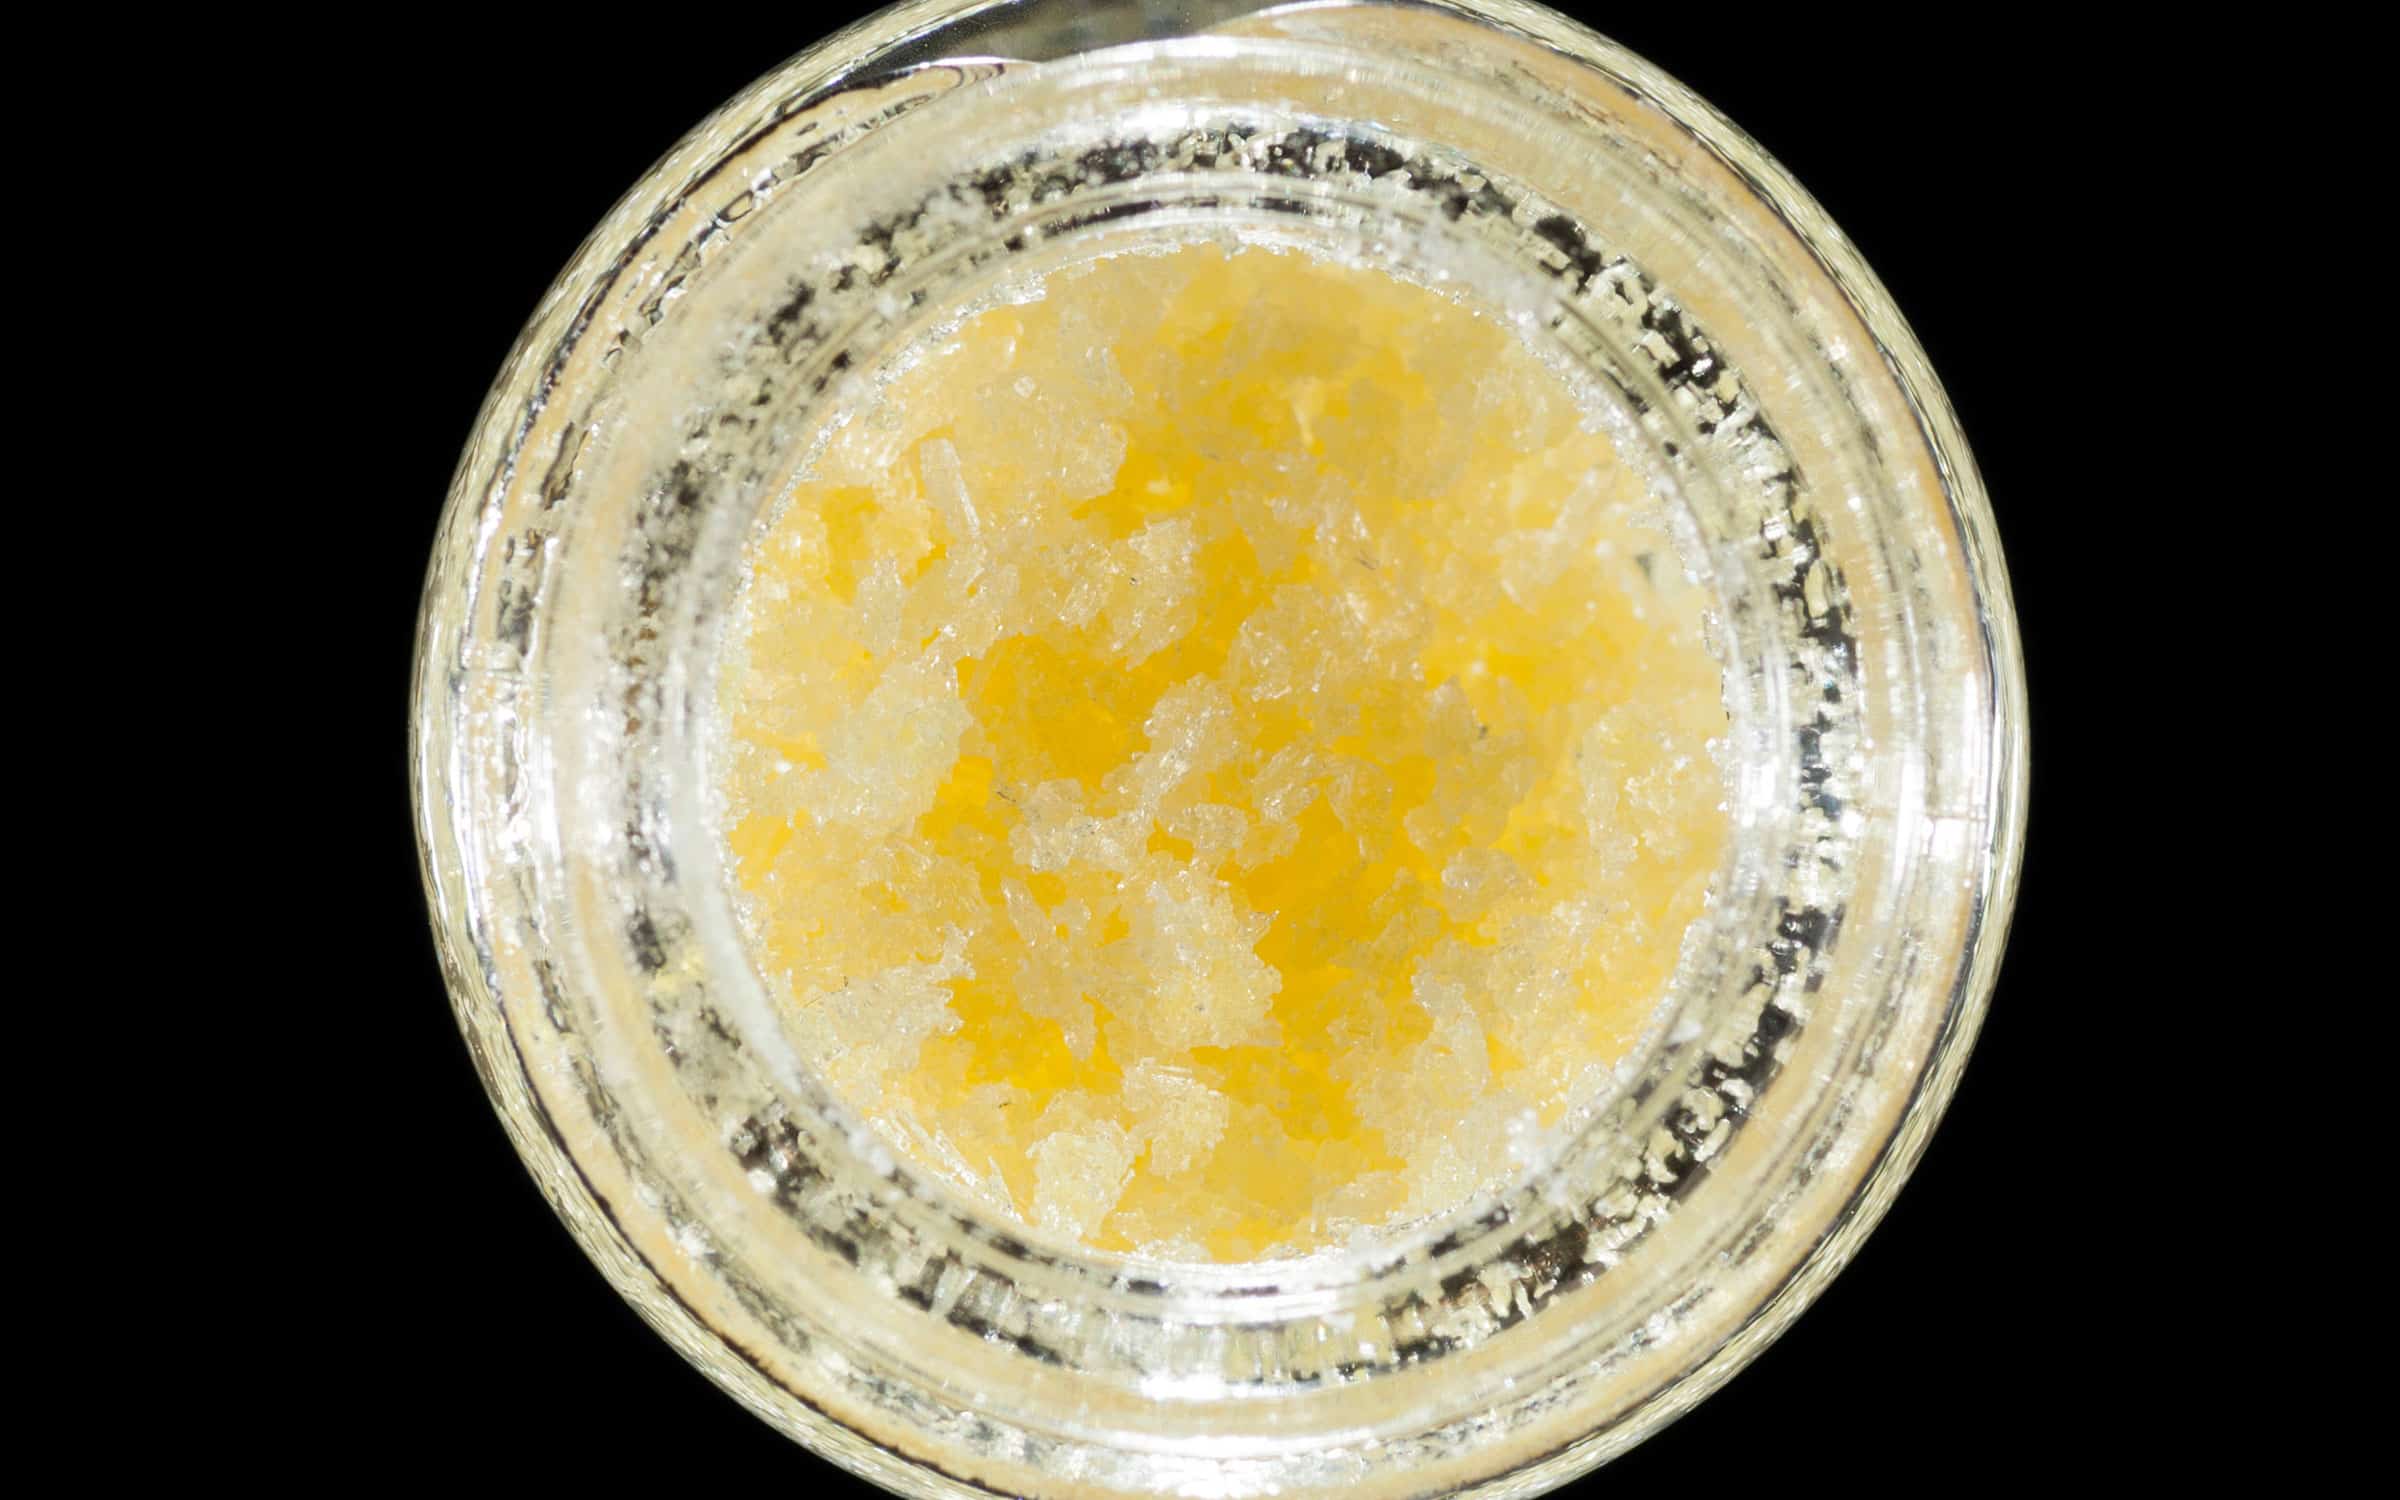 CBD CONCENTRATES DENVER - Cbd|Concentrates|Products|Concentrate|Hemp|Shatter|Wax|Isolate|Product|Thc|Terpenes|Oil|Effects|Cannabis|Cannabinoids|Spectrum|Plant|Form|Way|Pure|Extract|Powder|Crystals|Dab|Process|Extraction|Flower|People|Benefits|Vape|Body|Experience|Resin|Quality|Waxes|Health|Time|Potency|Amount|Forms|Cbd Concentrates|Cbd Concentrate|Cbd Wax|Cbd Shatter|Cbd Products|Cbd Isolate|Dab Rig|Cannabis Plant|Live Resin|Hemp Plant|Cbd Waxes|Free Shipping|Cbd Oil|Cbd Crystals|Tweedle Farms|Cbd Dabs|Full Spectrum Cbd|Dab Pen|Extraction Process|Daily Basis|Cbd Isolates|Entourage Effect|Scientific Hemp Oil®|Blue Moon Hemp|Cbd Oil Solutions|Pure Cbd Isolate|Pure Cbd|Small Amount|United States|Cbd Flower